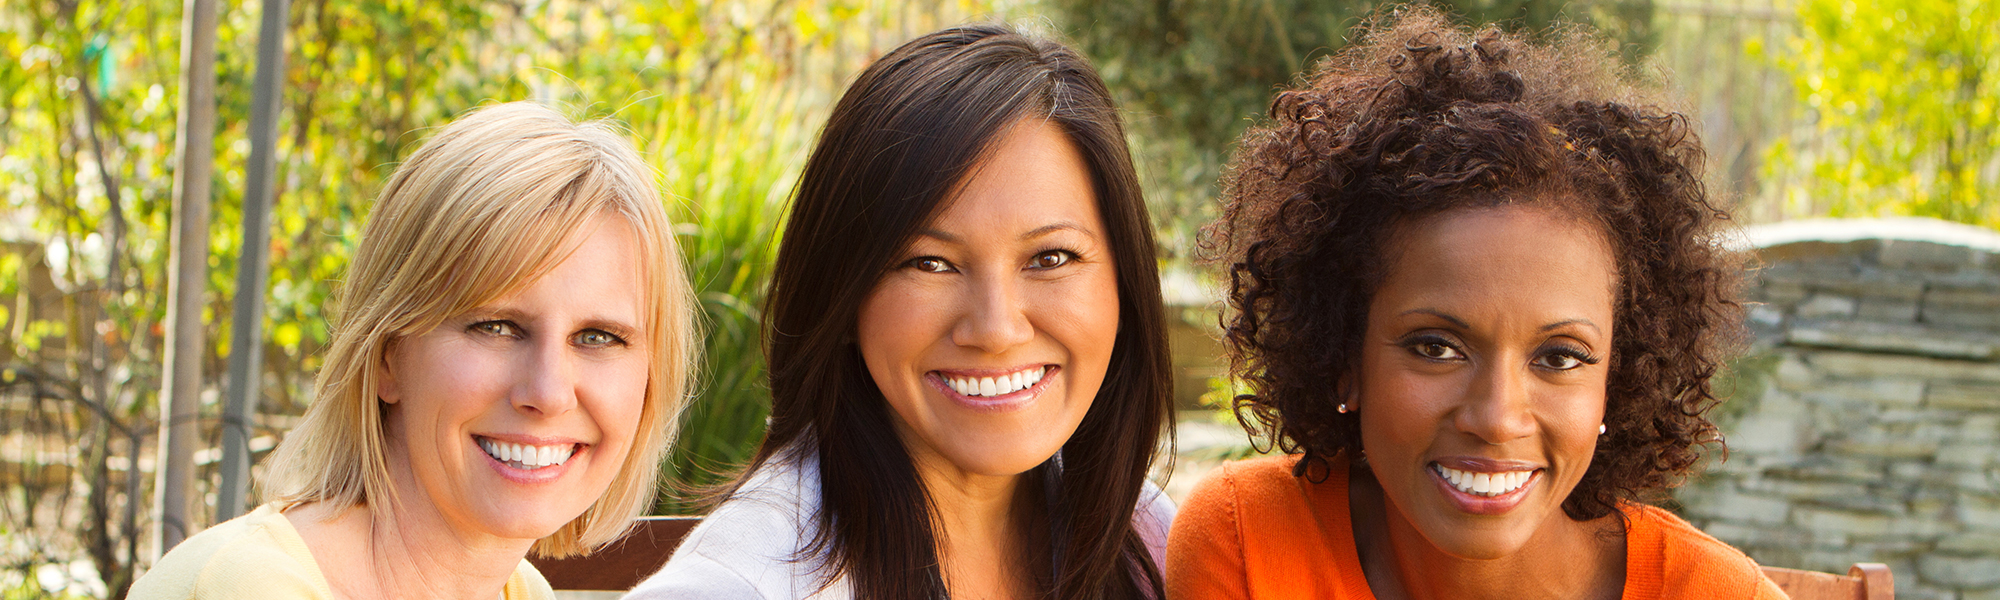 Group of three smiling women outdoors